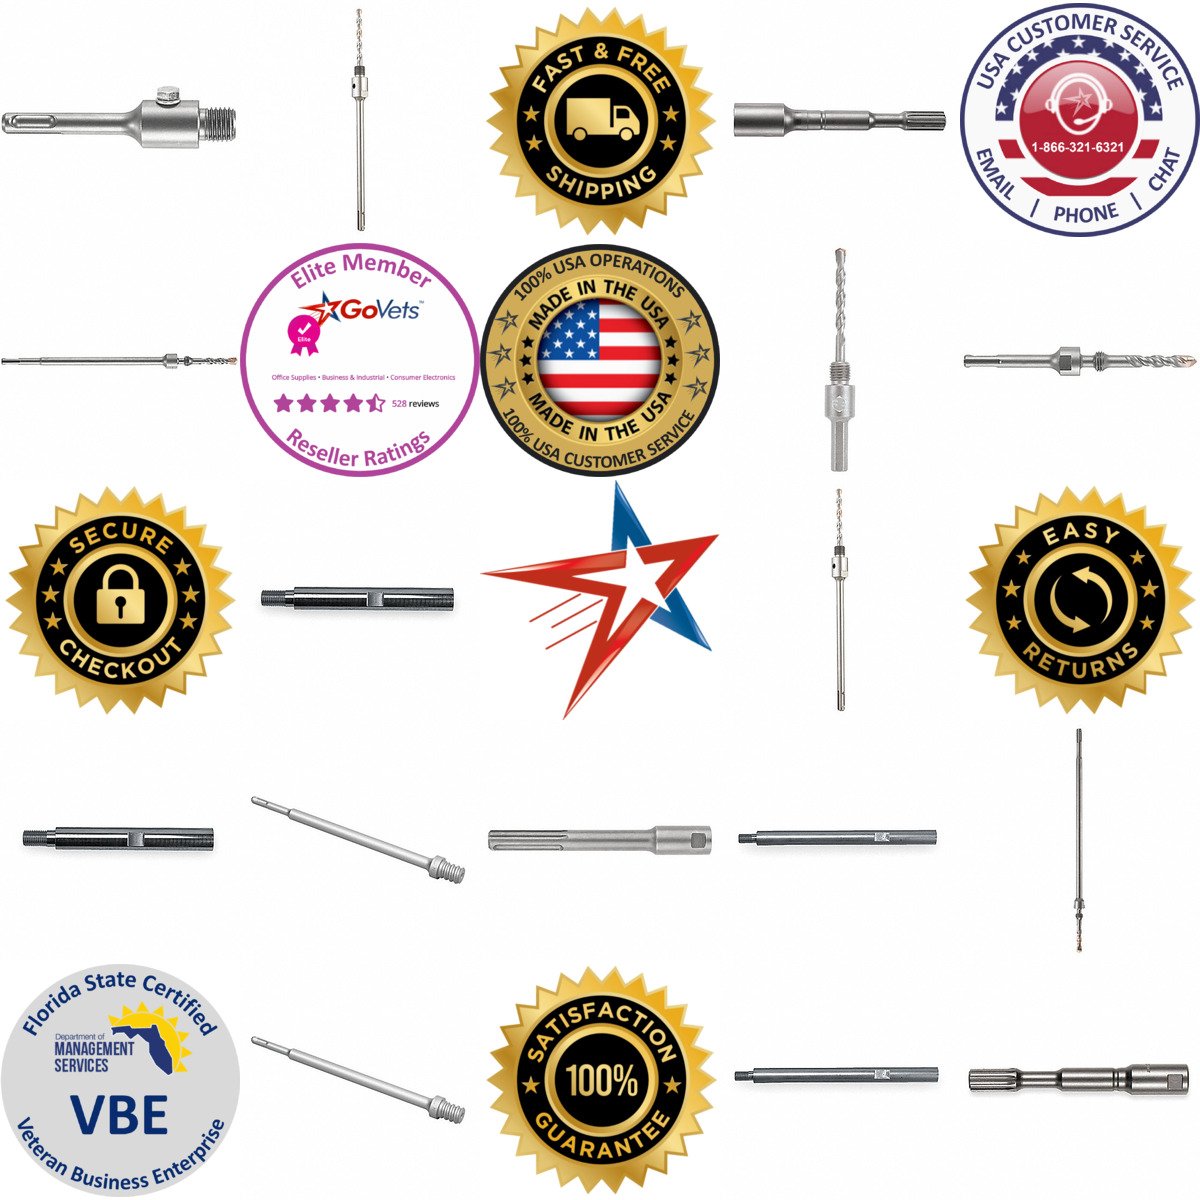 A selection of Coring Bit Accessories products on GoVets